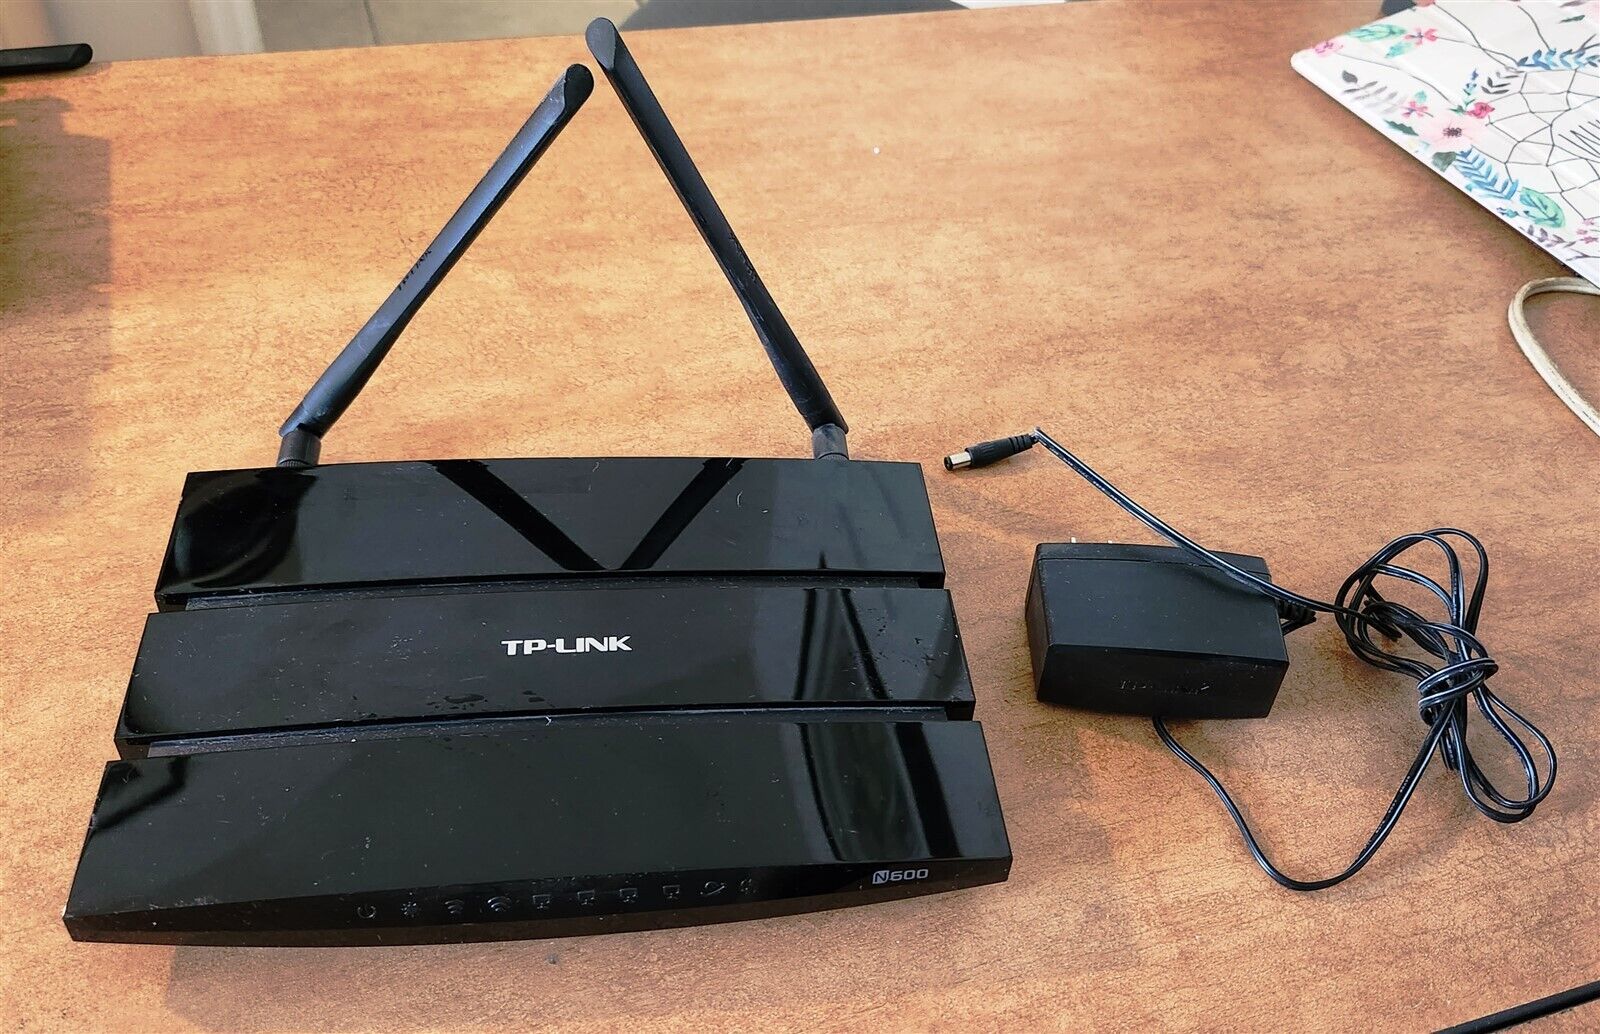 TP-Link TL-WDR3600 N600 Wireless Dual Band Gigabit Router Tested Works Great